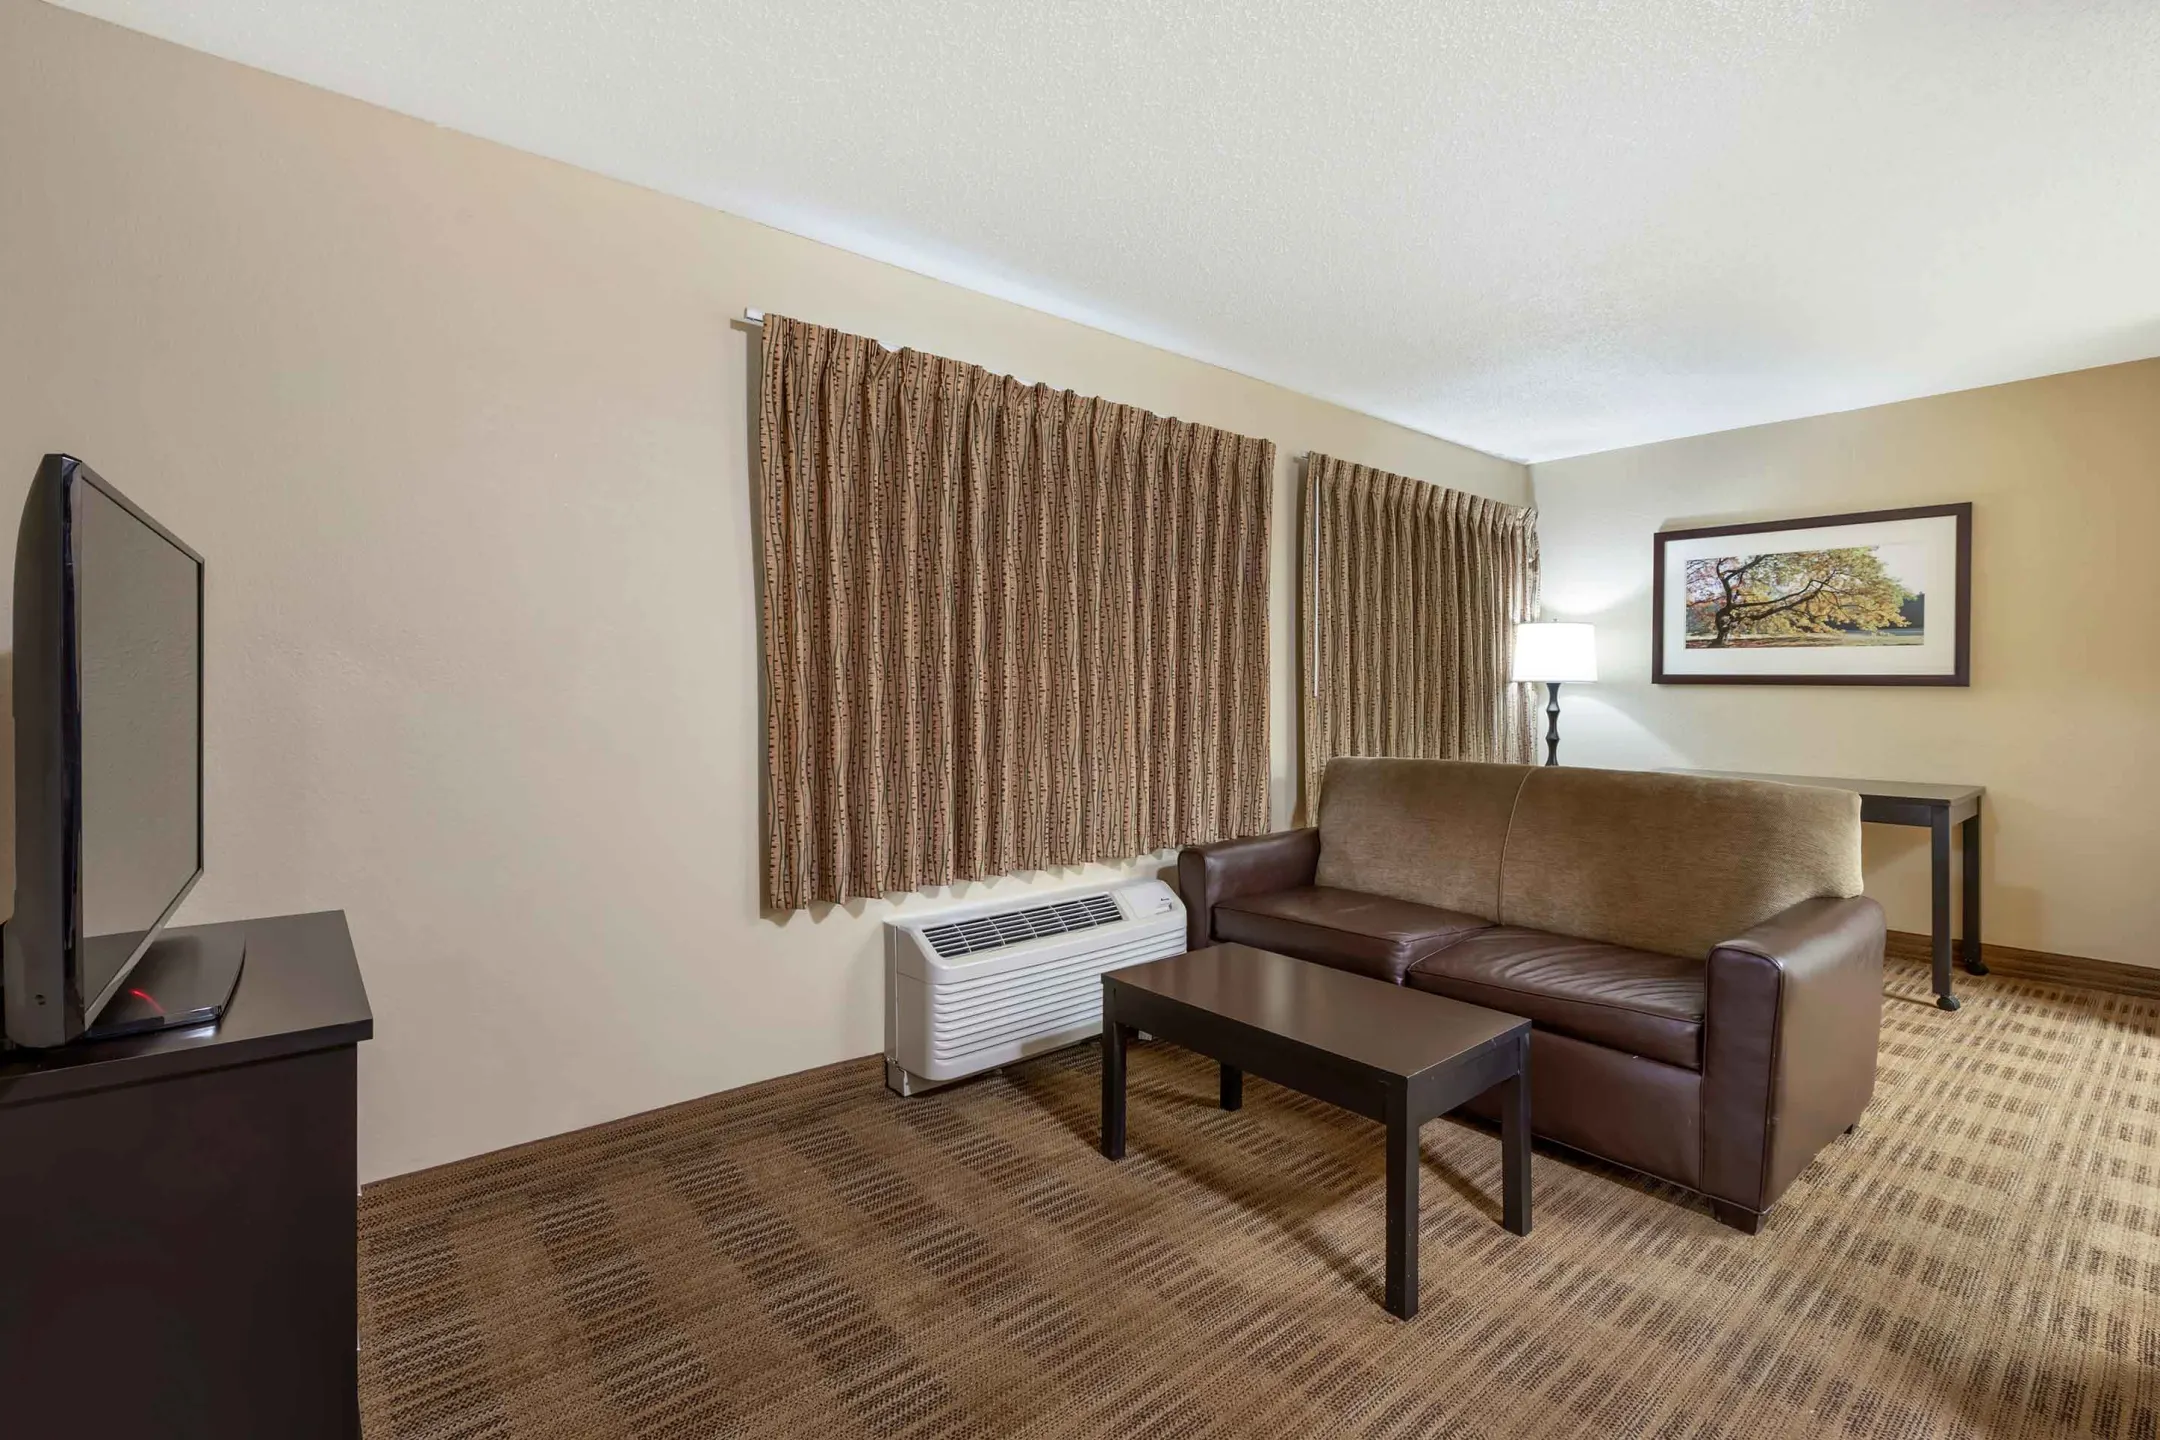 Living Room - Furnished Studio - Indianapolis - West 86th St. - Indianapolis, IN